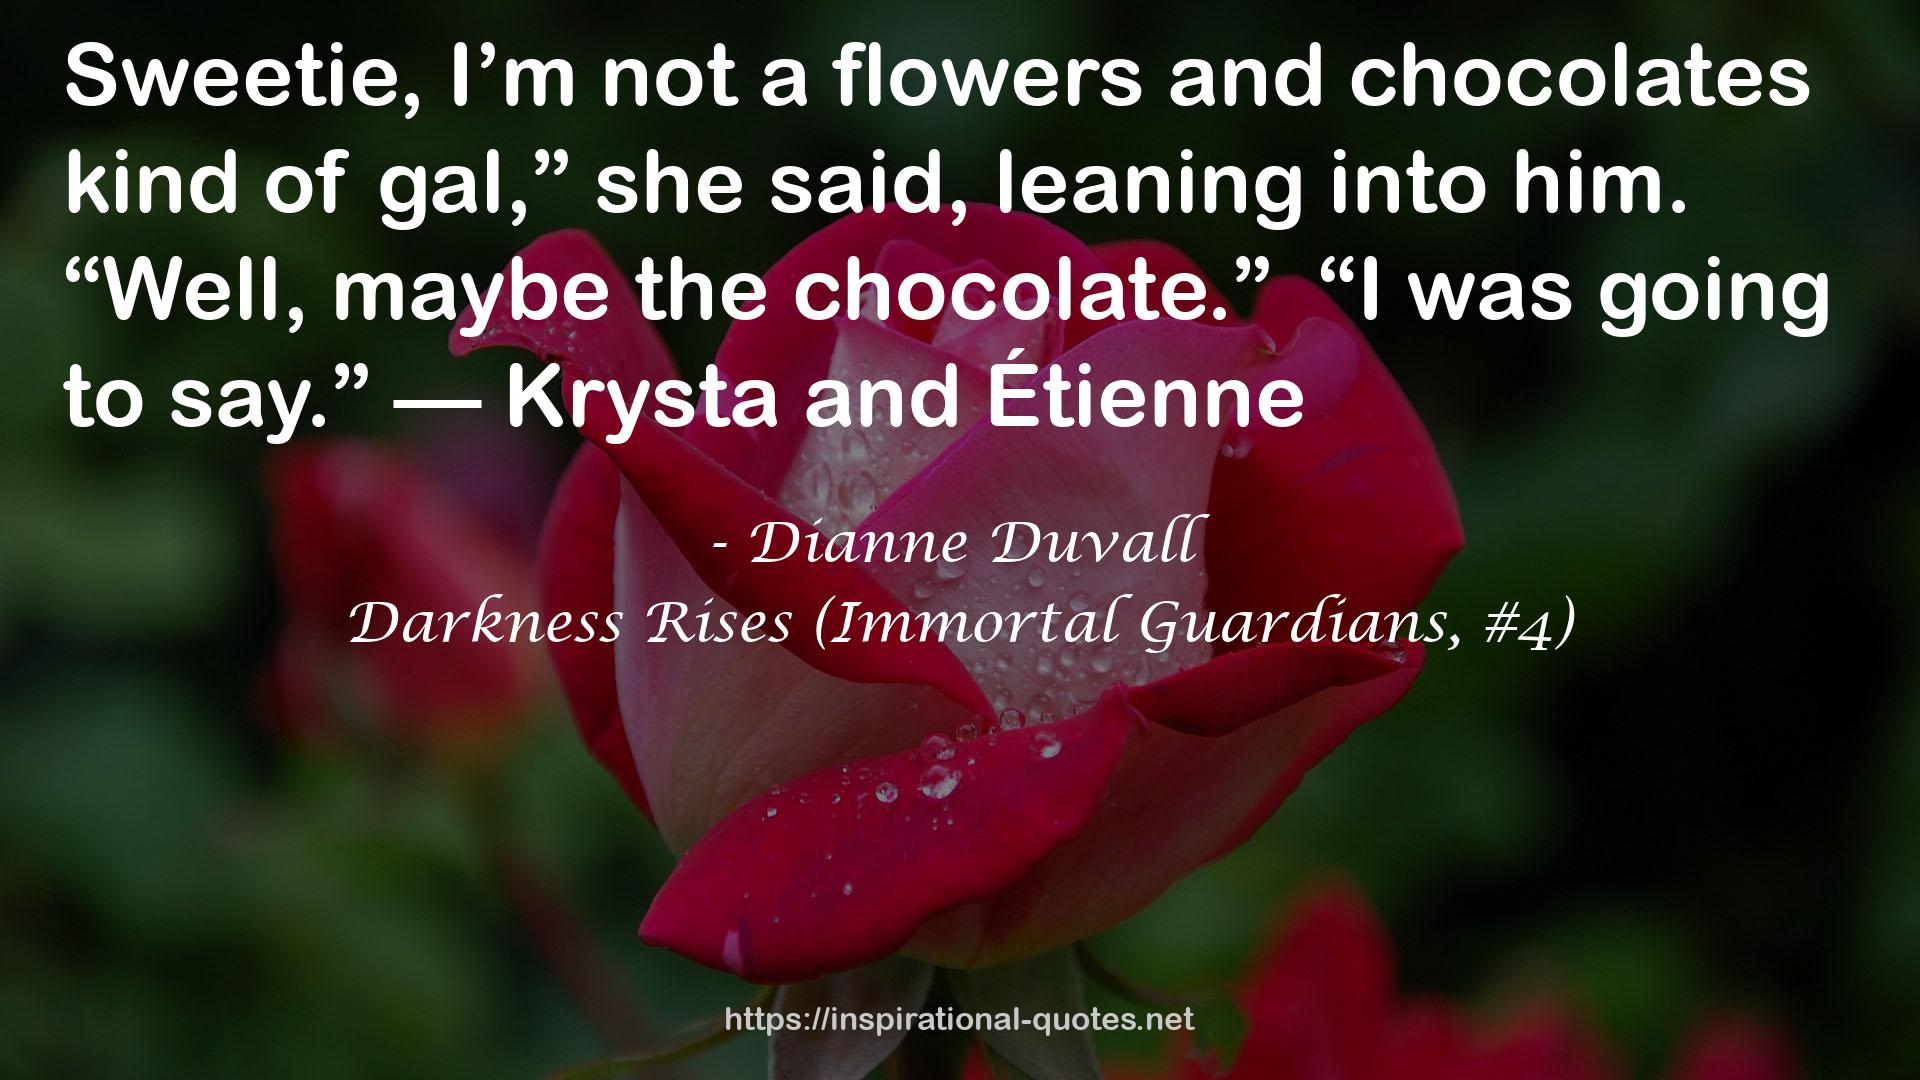 Darkness Rises (Immortal Guardians, #4) QUOTES